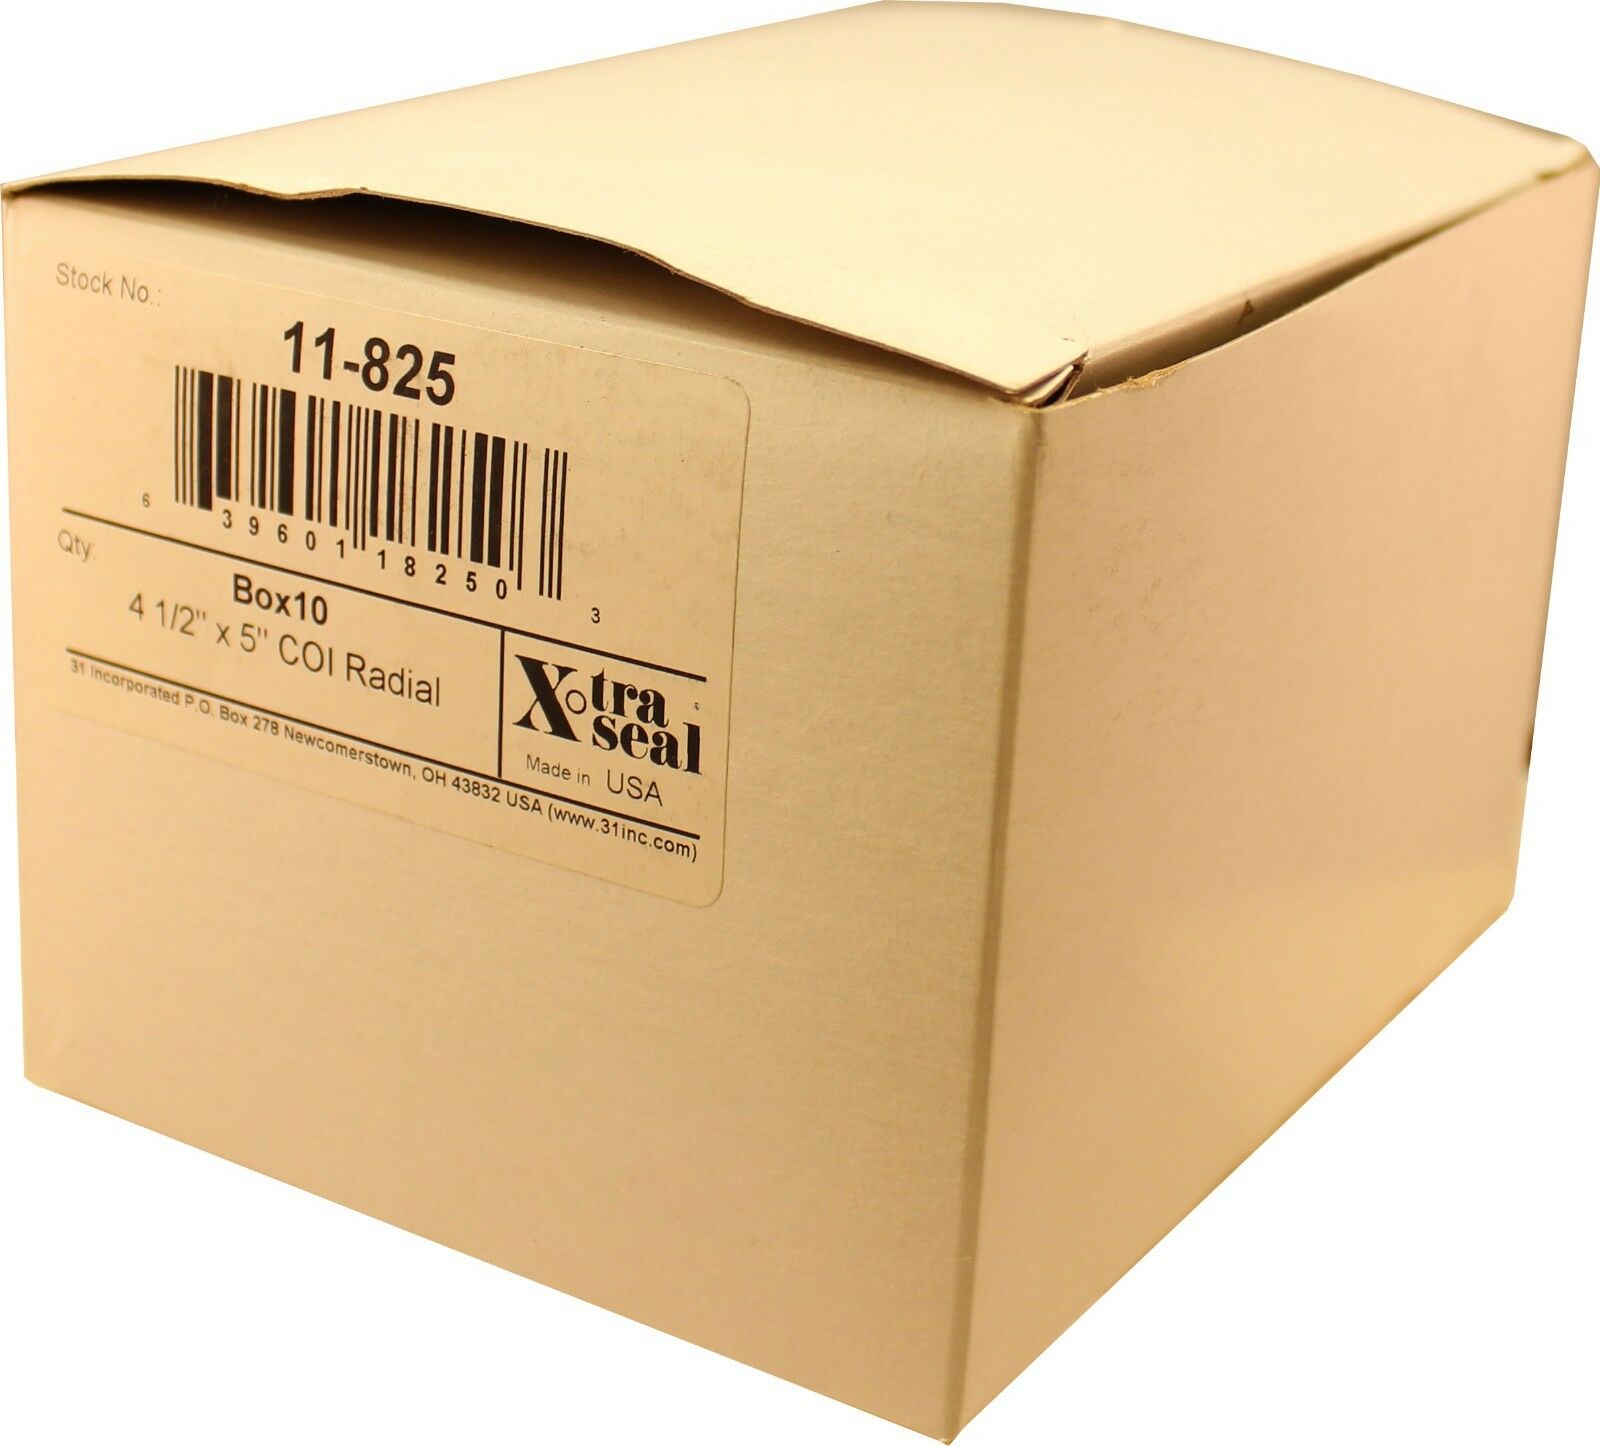 Xtra Seal 11-825 4-1/2"X5" Radial Tire Patch 3ply Box of 10